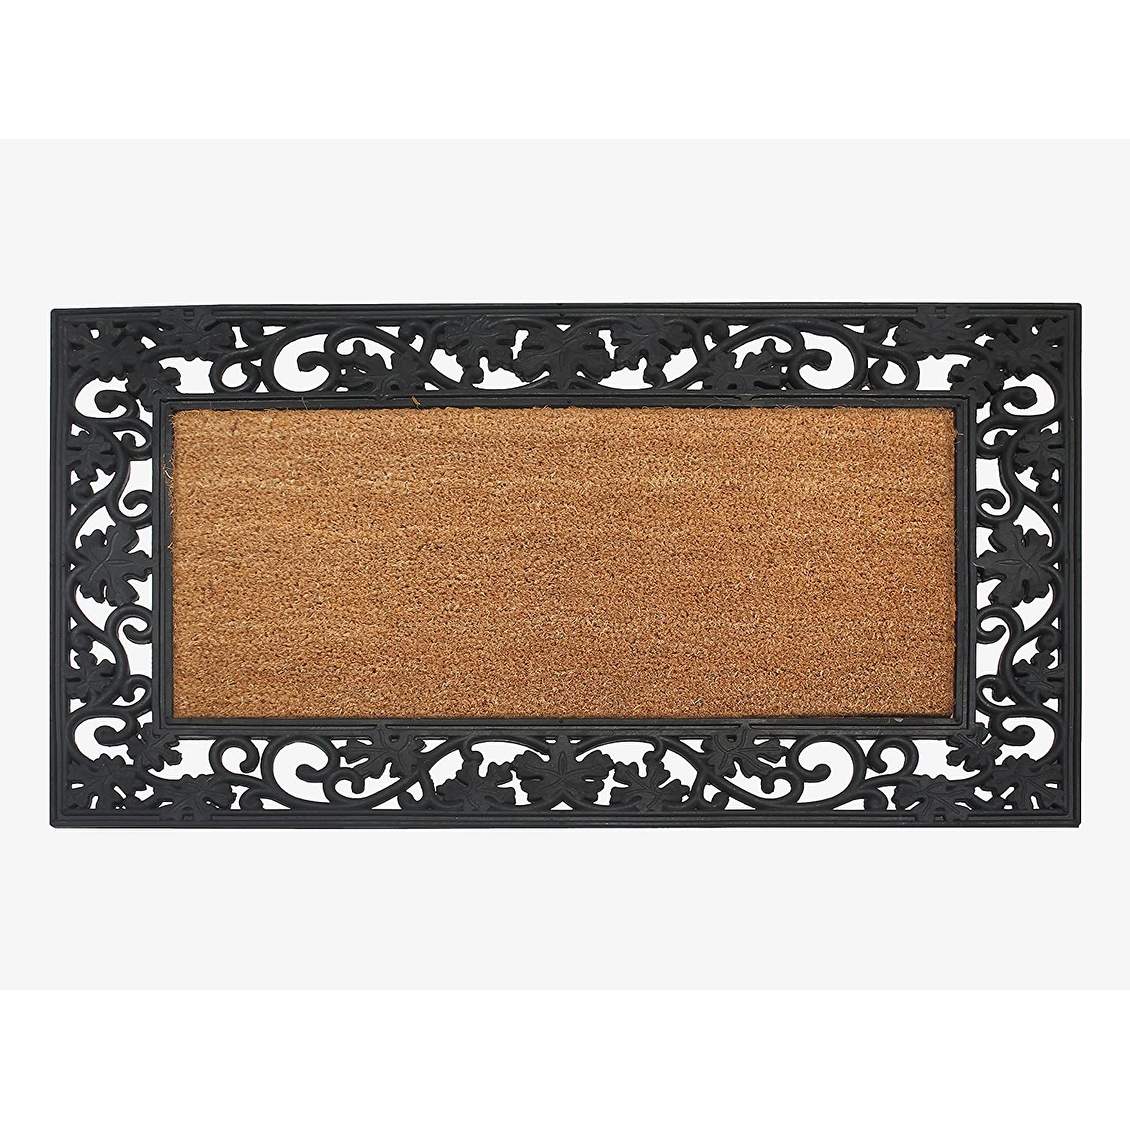 A1HC Rubber and Coir Large Heavy-Duty Outdoor Doormat - On Sale